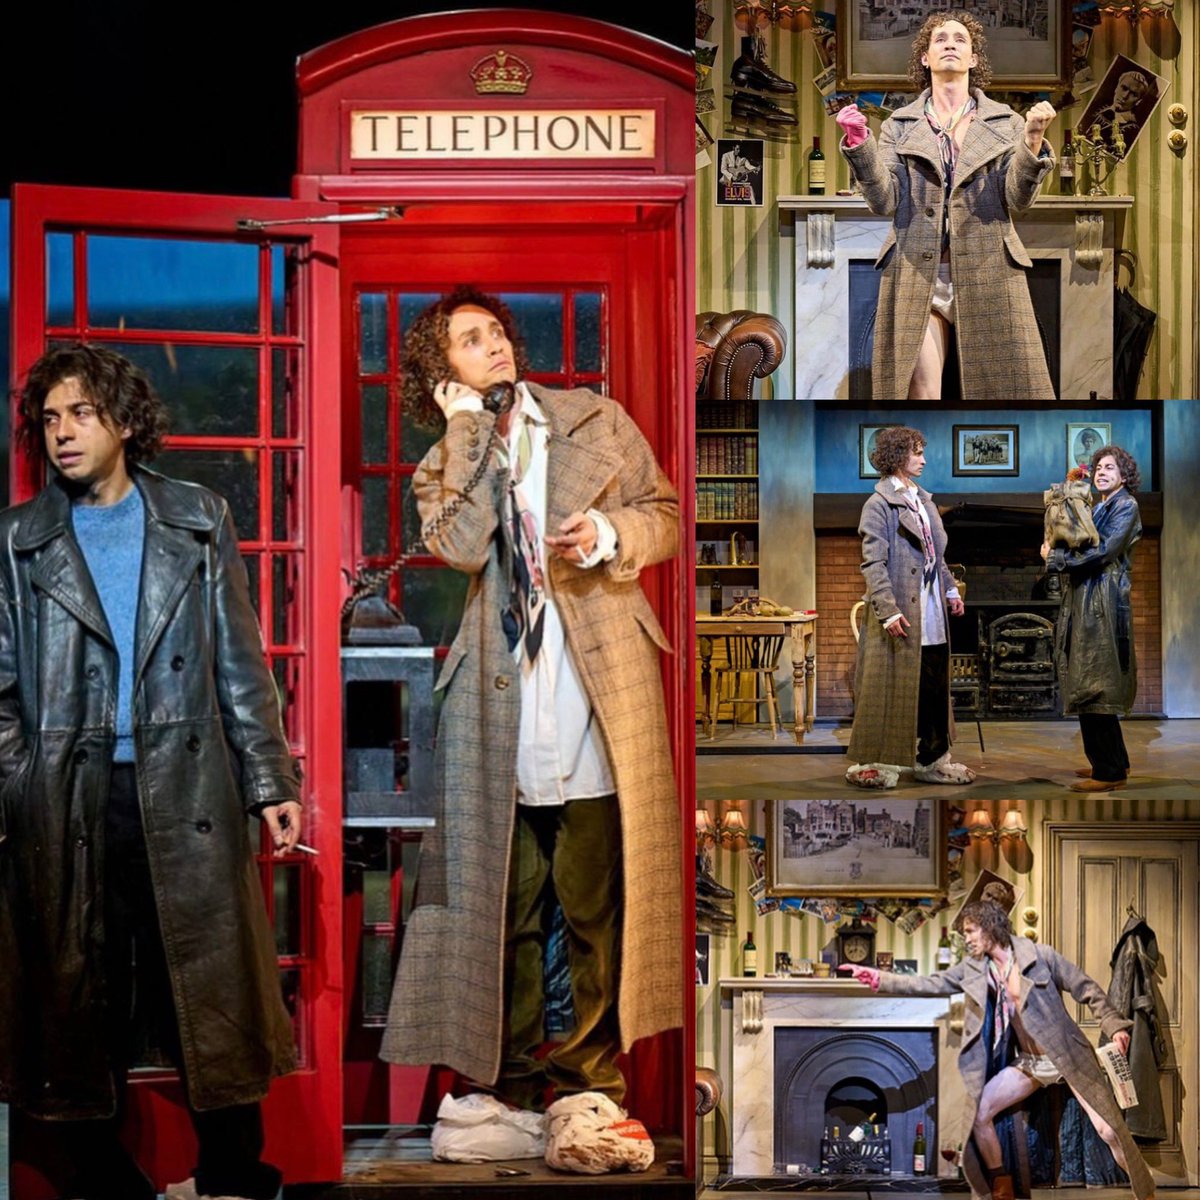 New official photos of Robert Sheehan and Adonis Siddique in ‘Withnail and I’ @BirminghamRep just published. Photos by Manuel Harlan © via Broadway World Tickets via Rep website